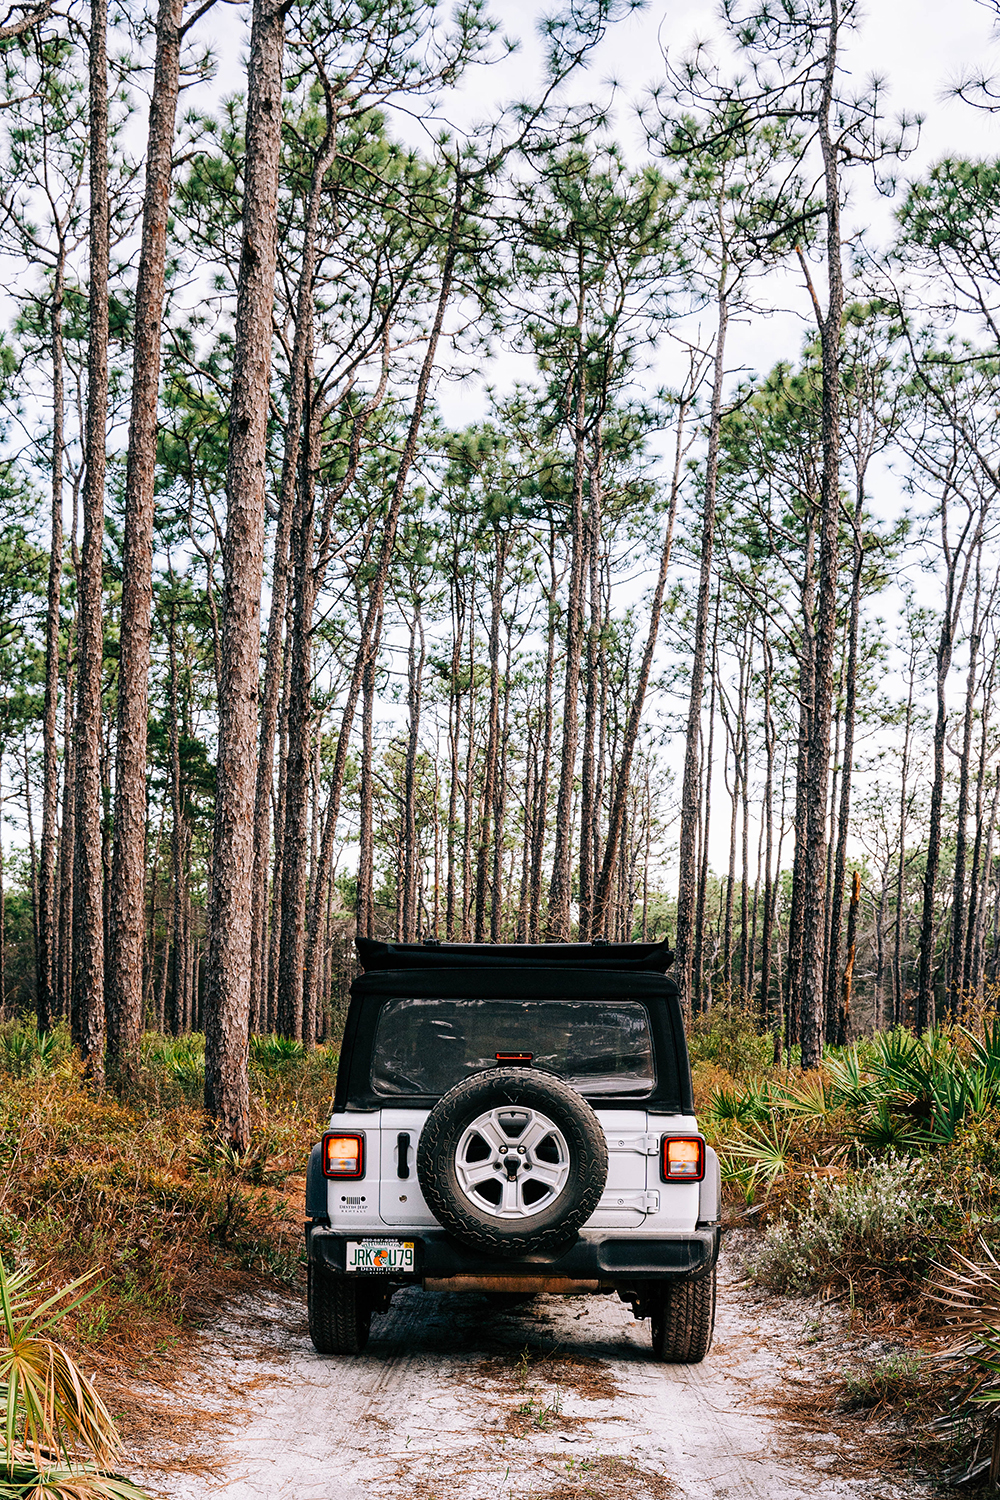 Destin Jeep Rentals - Find Things To Do In Destin Florida